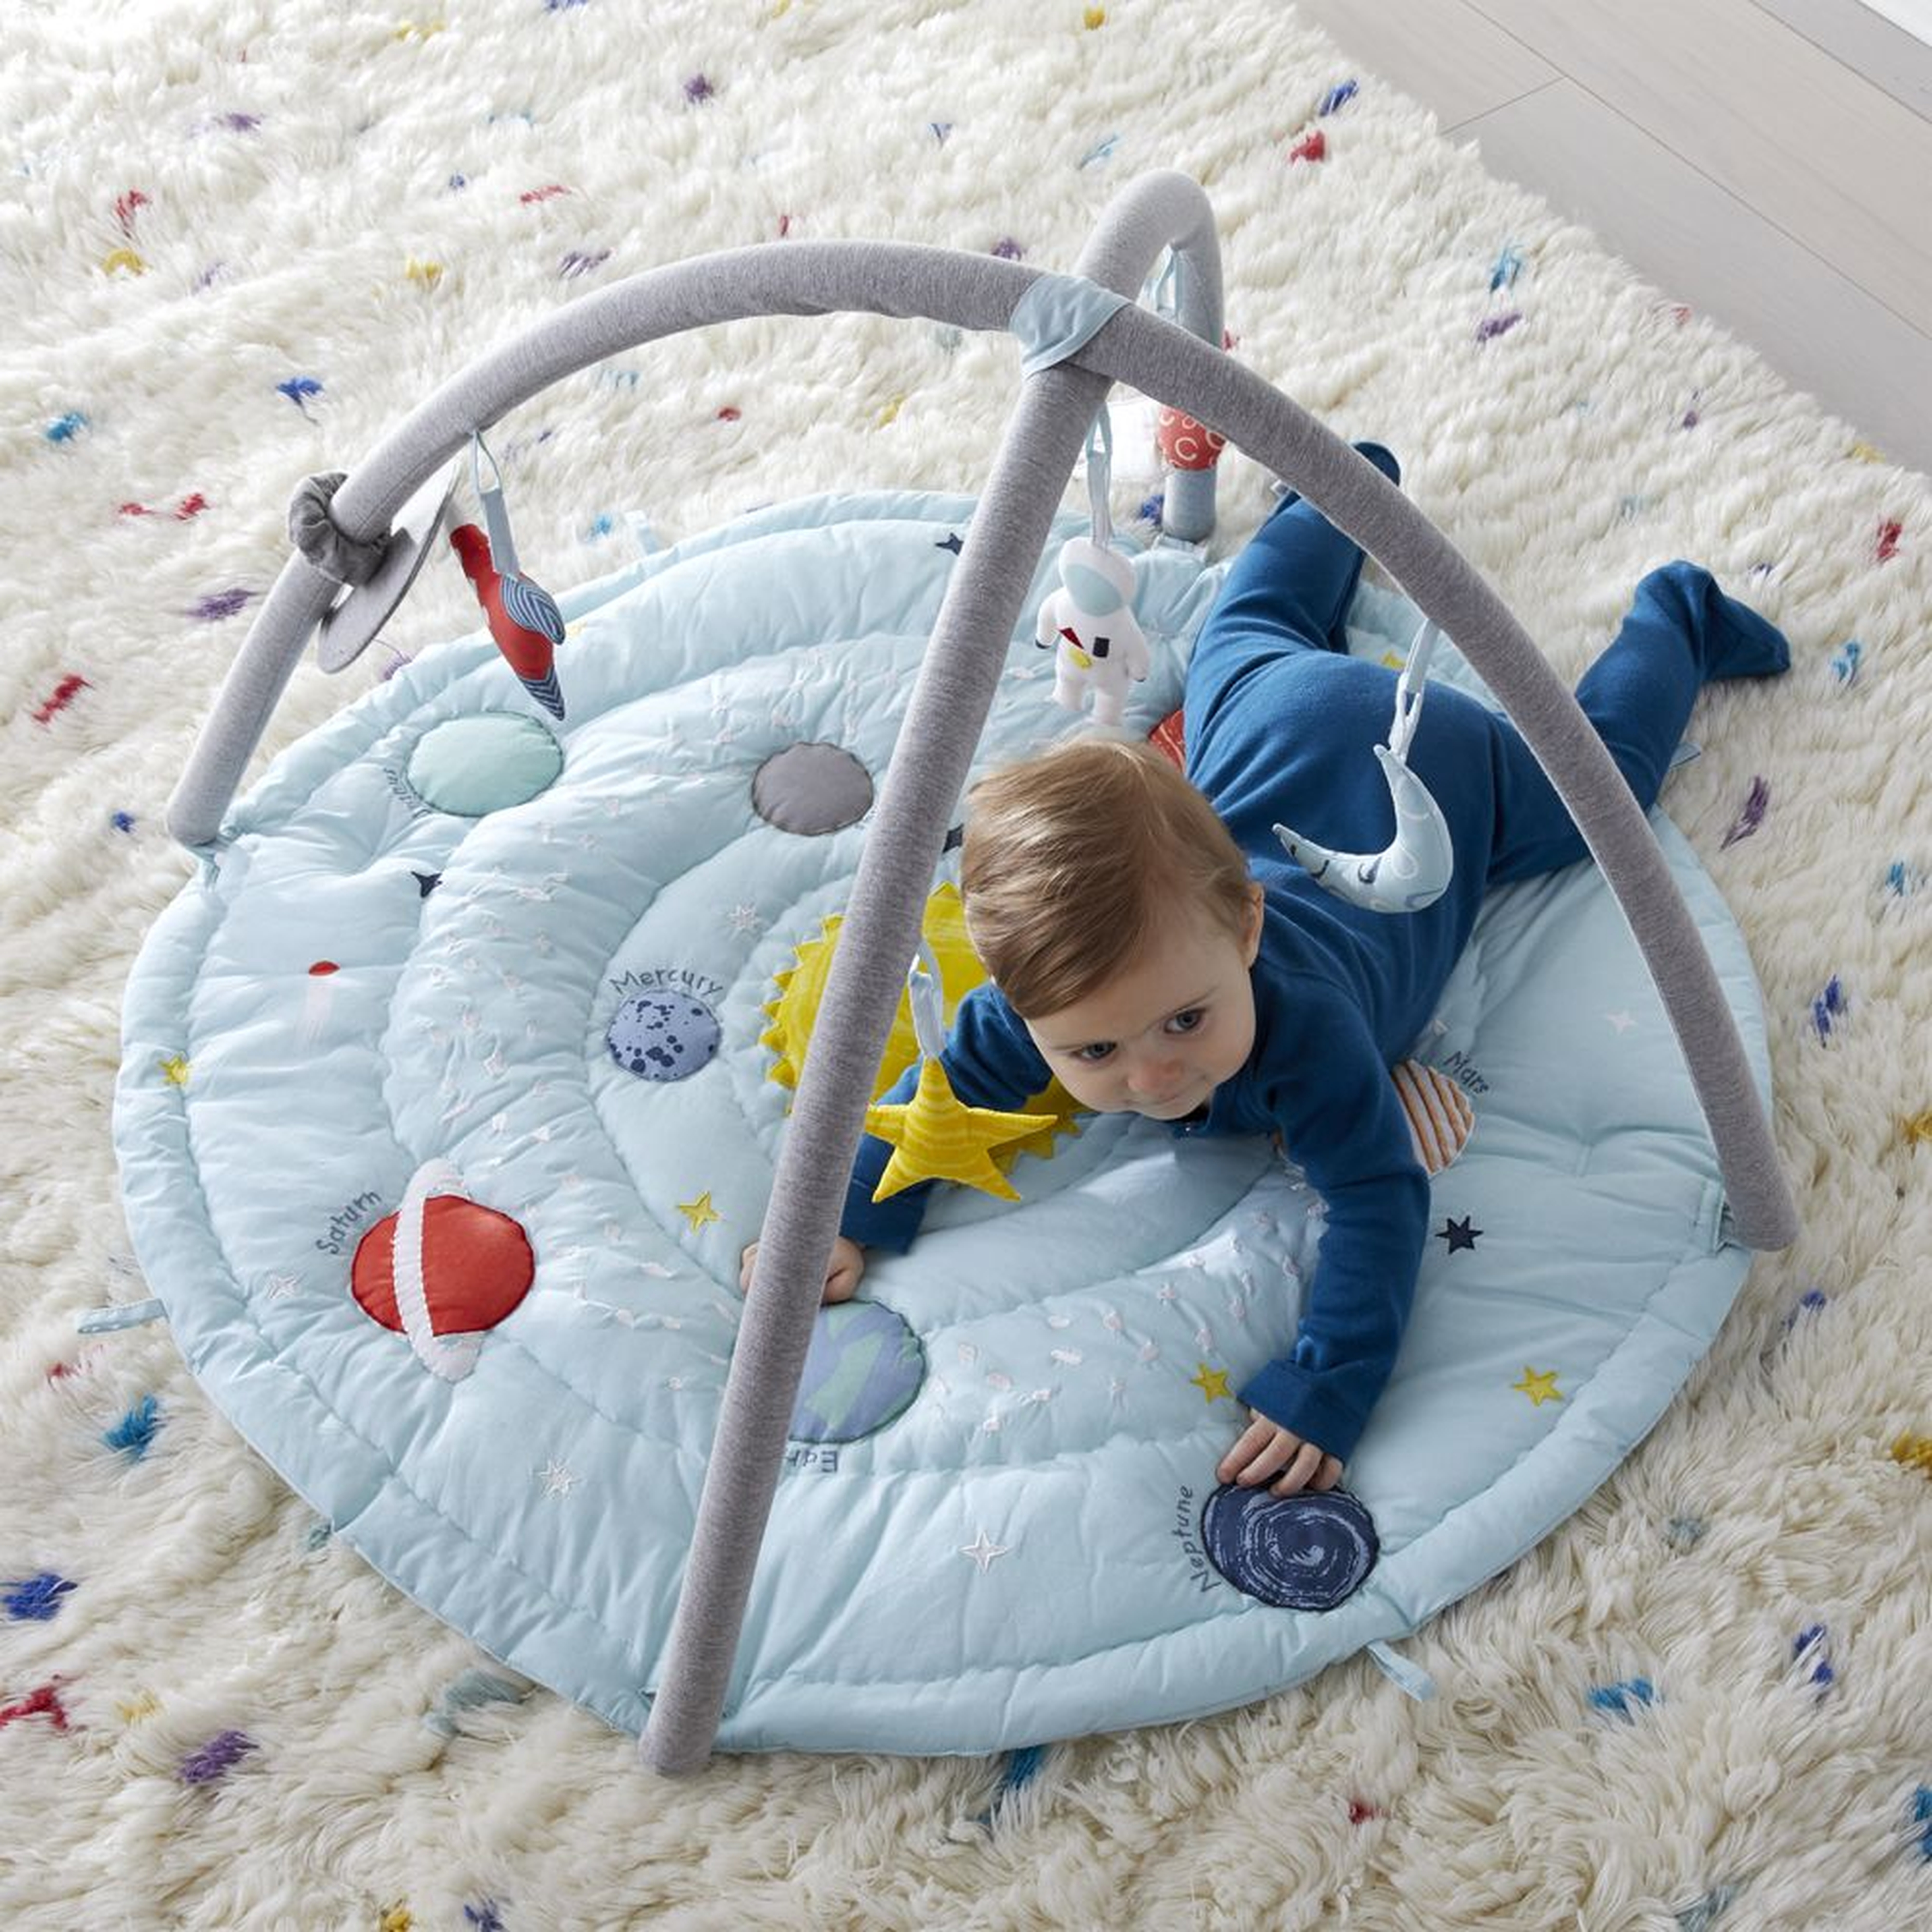 Outer Space Baby Activity Gym - Crate and Barrel